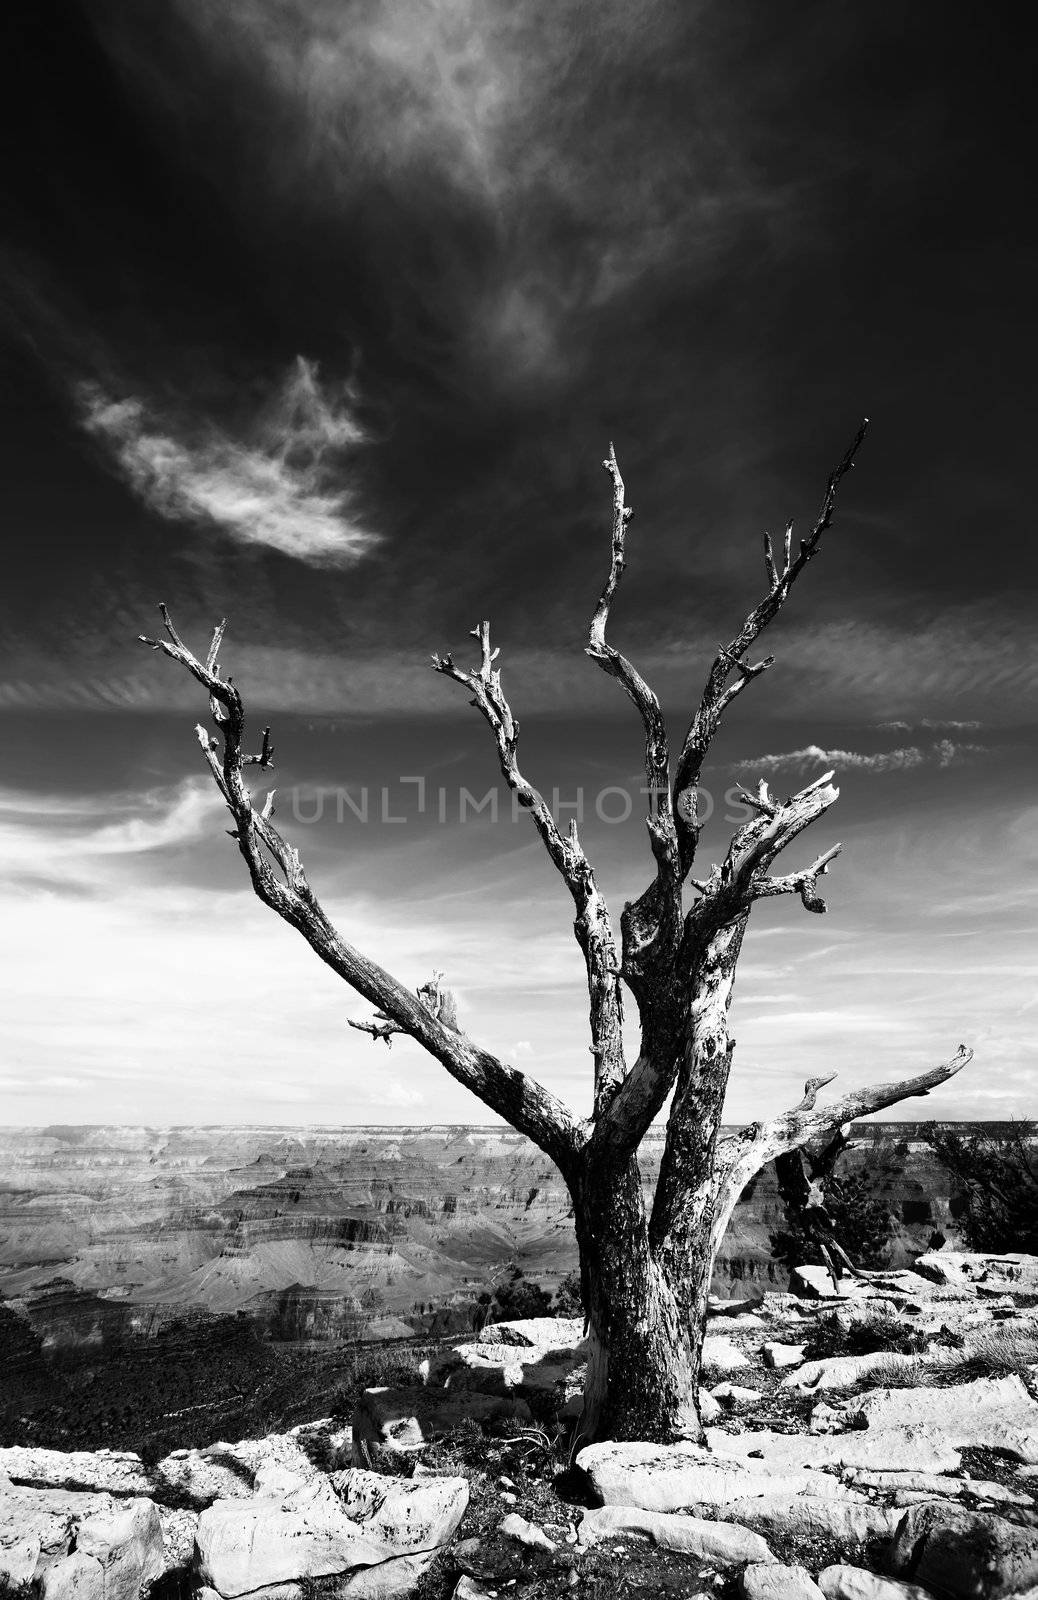 Dead tree at the rim of the Grand Canyon by Creatista